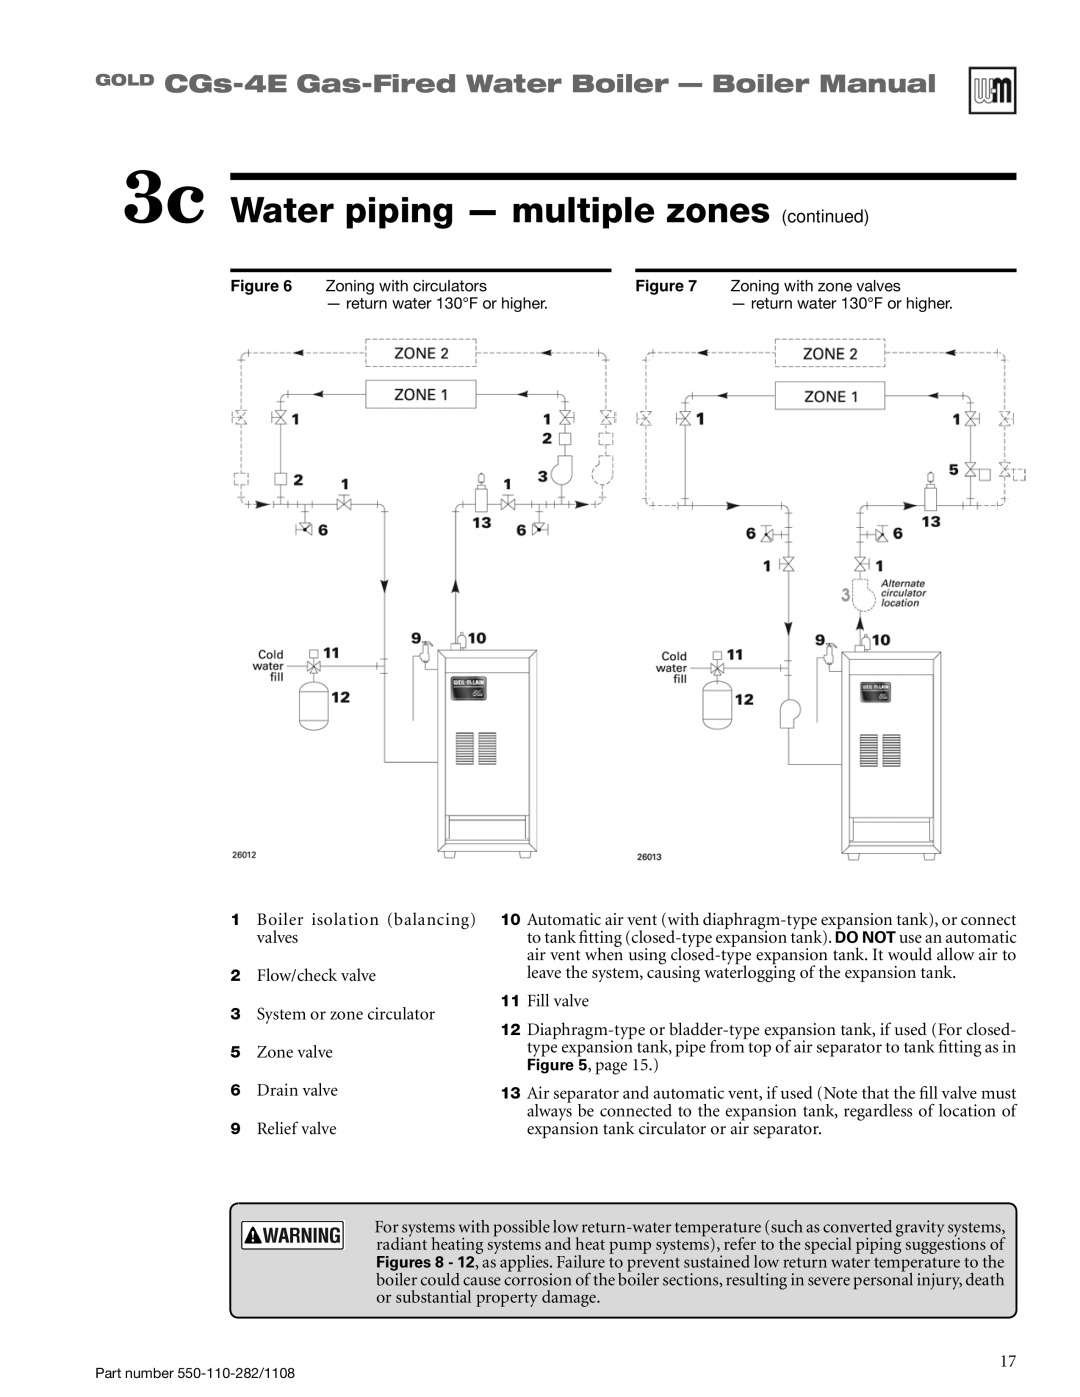 Weil-McLain CGS-4E manual 3c Water piping - multiple zones continued, GOLD CGs-4E Gas-FiredWater Boiler - Boiler Manual 